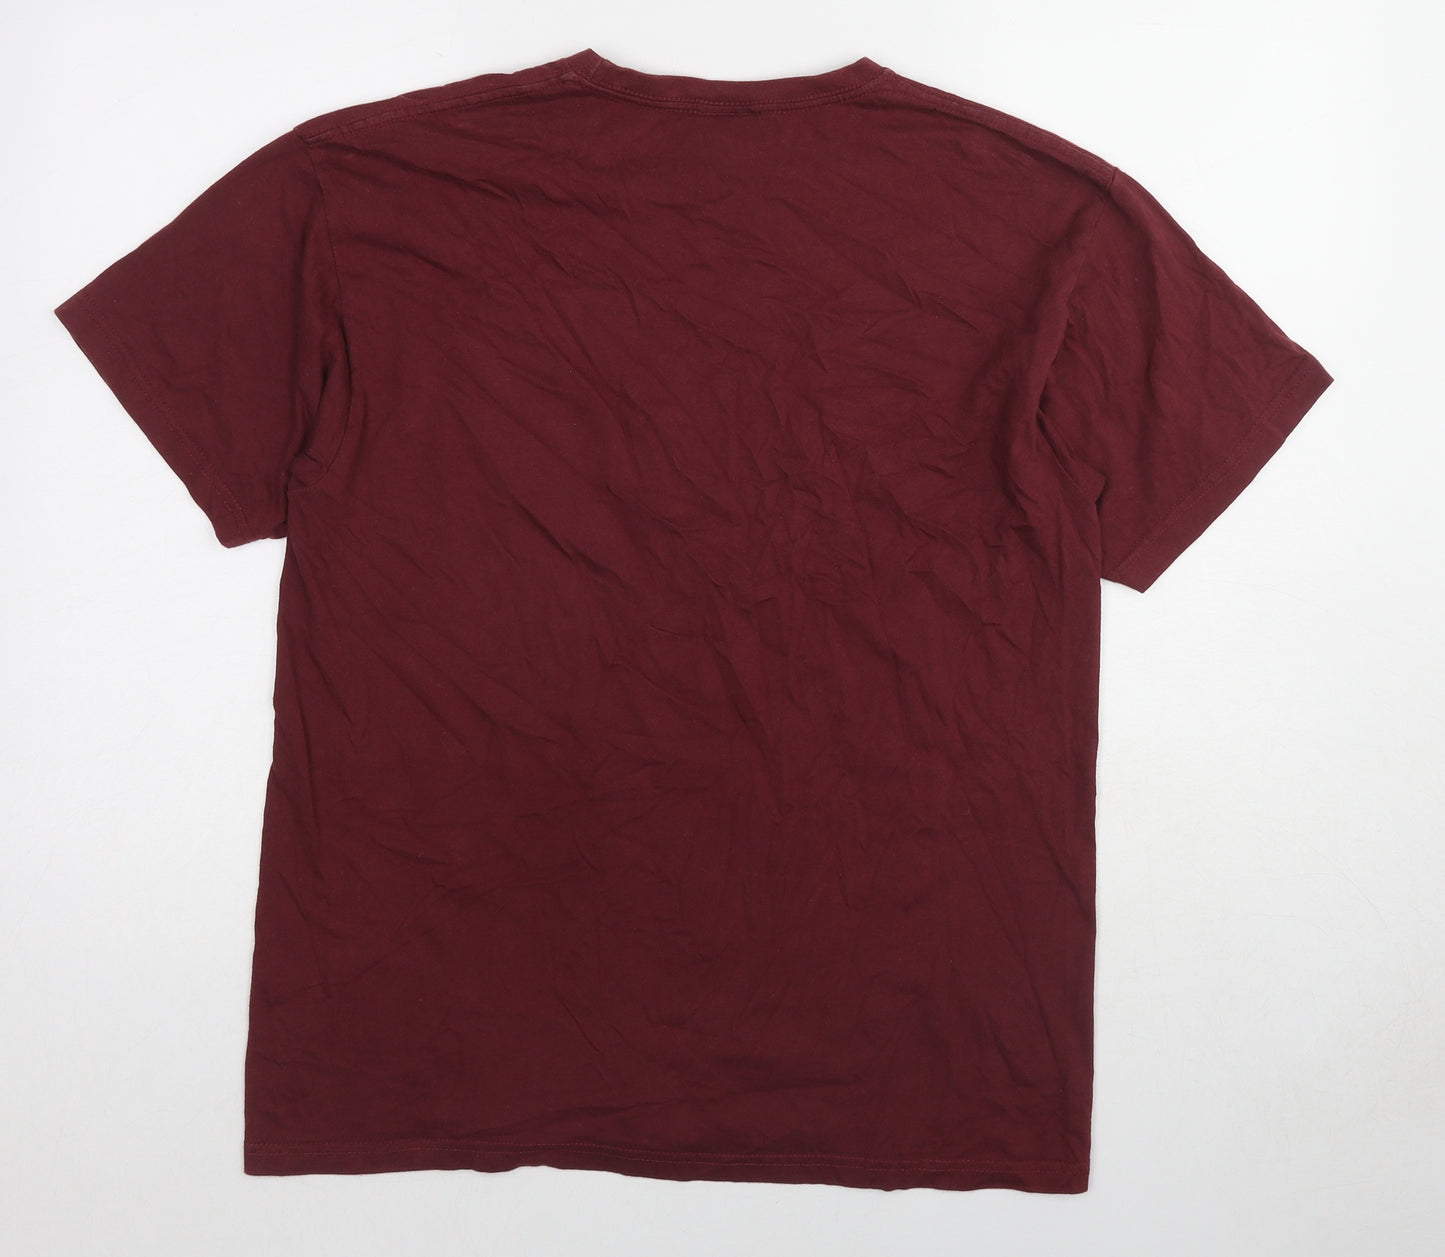 JHK Mens Red Cotton T-Shirt Size M Round Neck